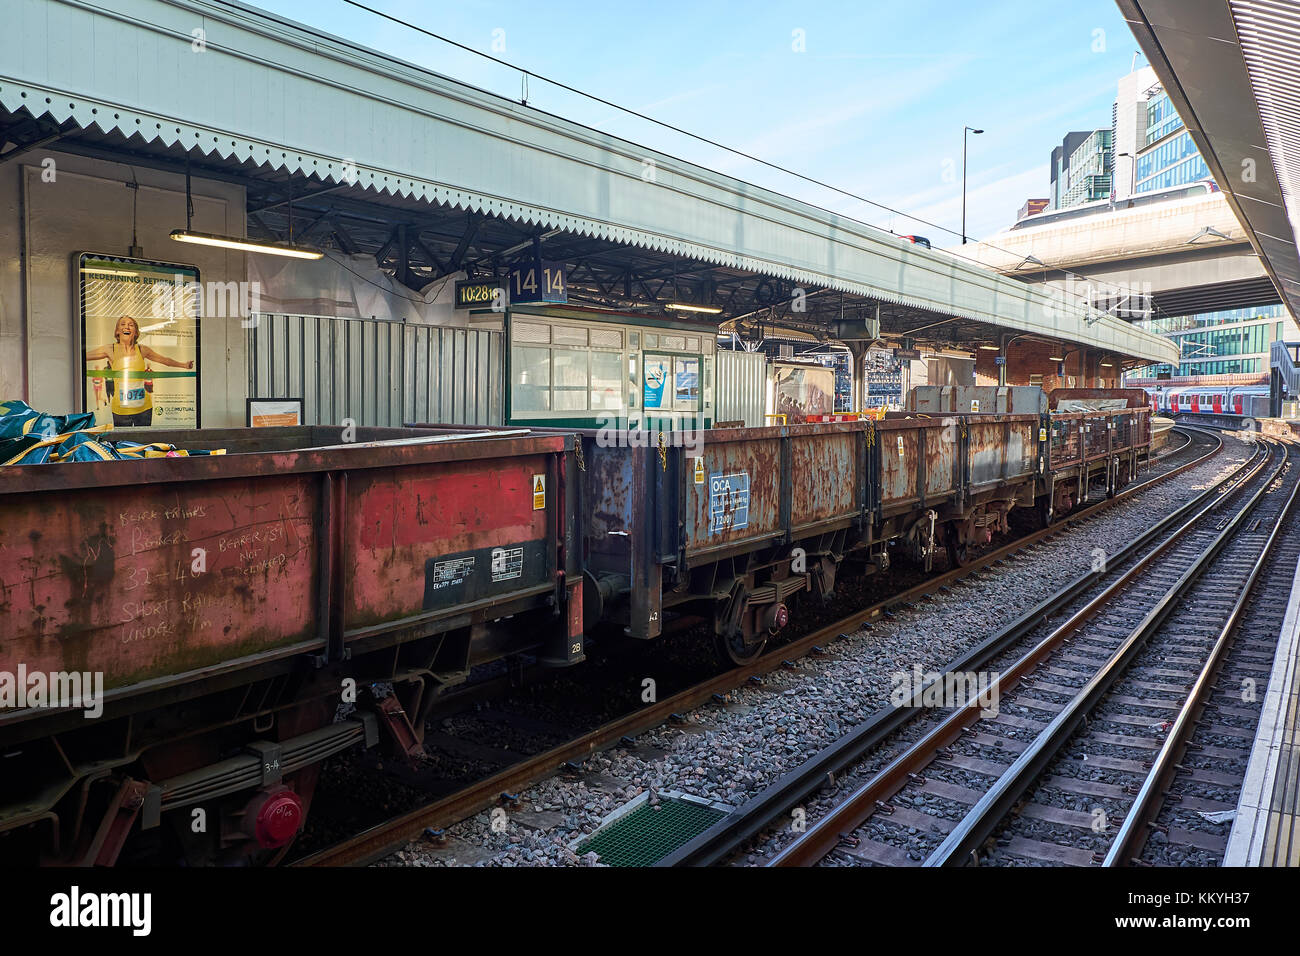 LONDON CITY - DECEMBER 26, 2016: Wagons on a freight train parked at Paddington Station for picking up scrap Stock Photo